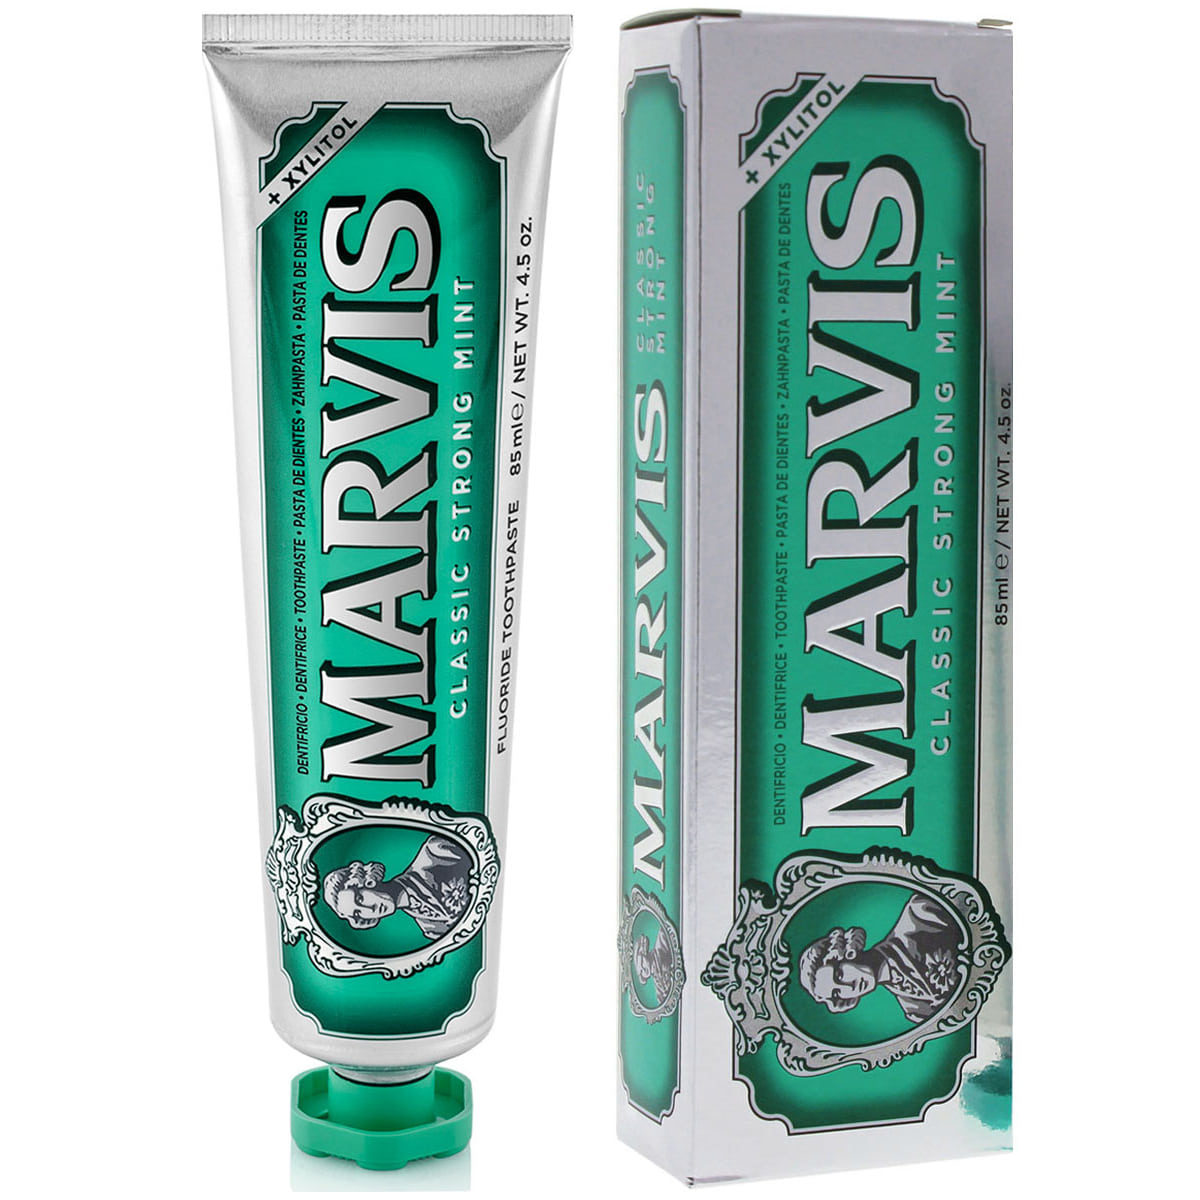 marvis classic strong mint travel size Зубная паста Marvis Classic Strong Mint Классическая мята